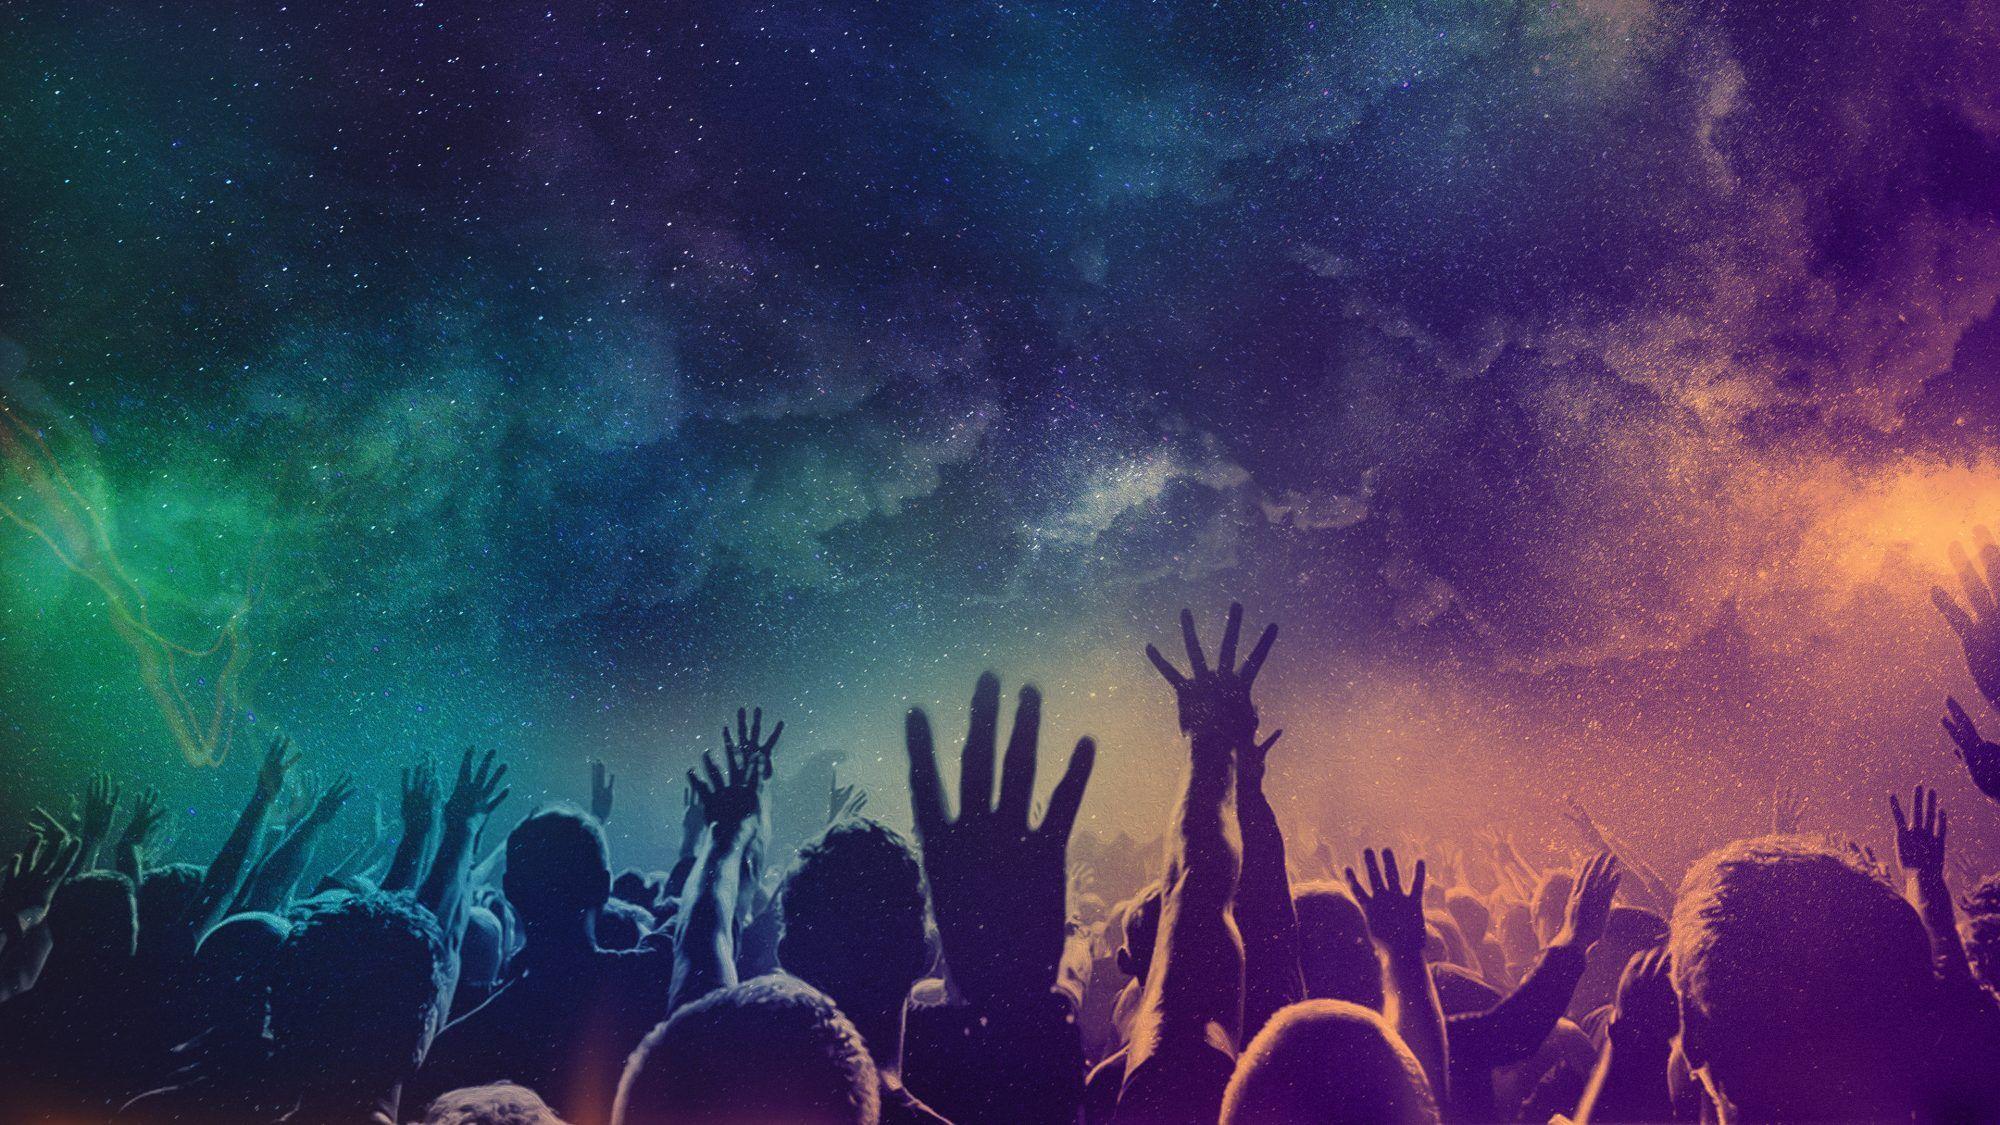 High Resolution Worship Backgrounds